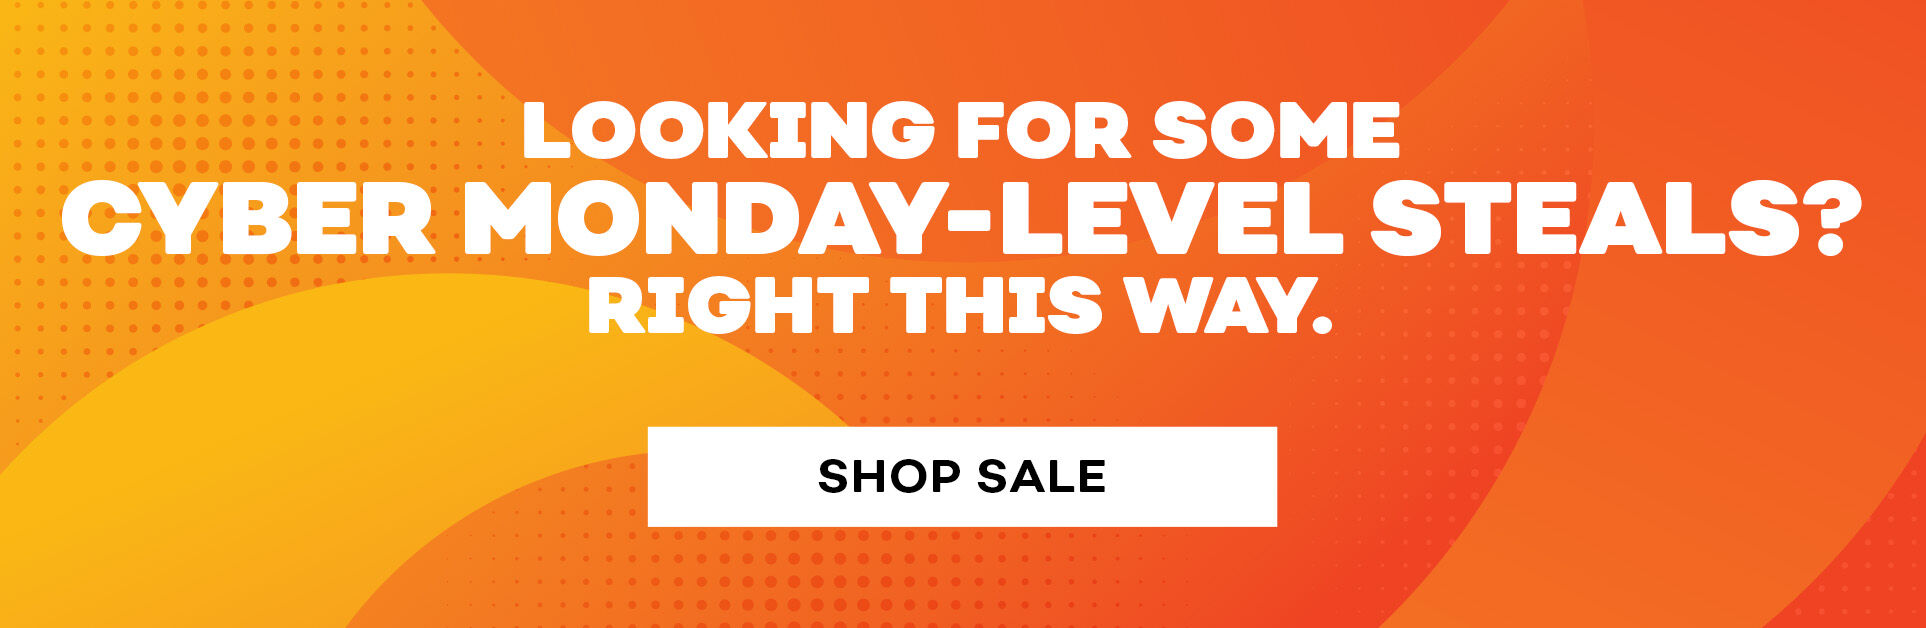  Looking for Some Cyber Monday-Level Steals? Right this Way. Shop Sale.